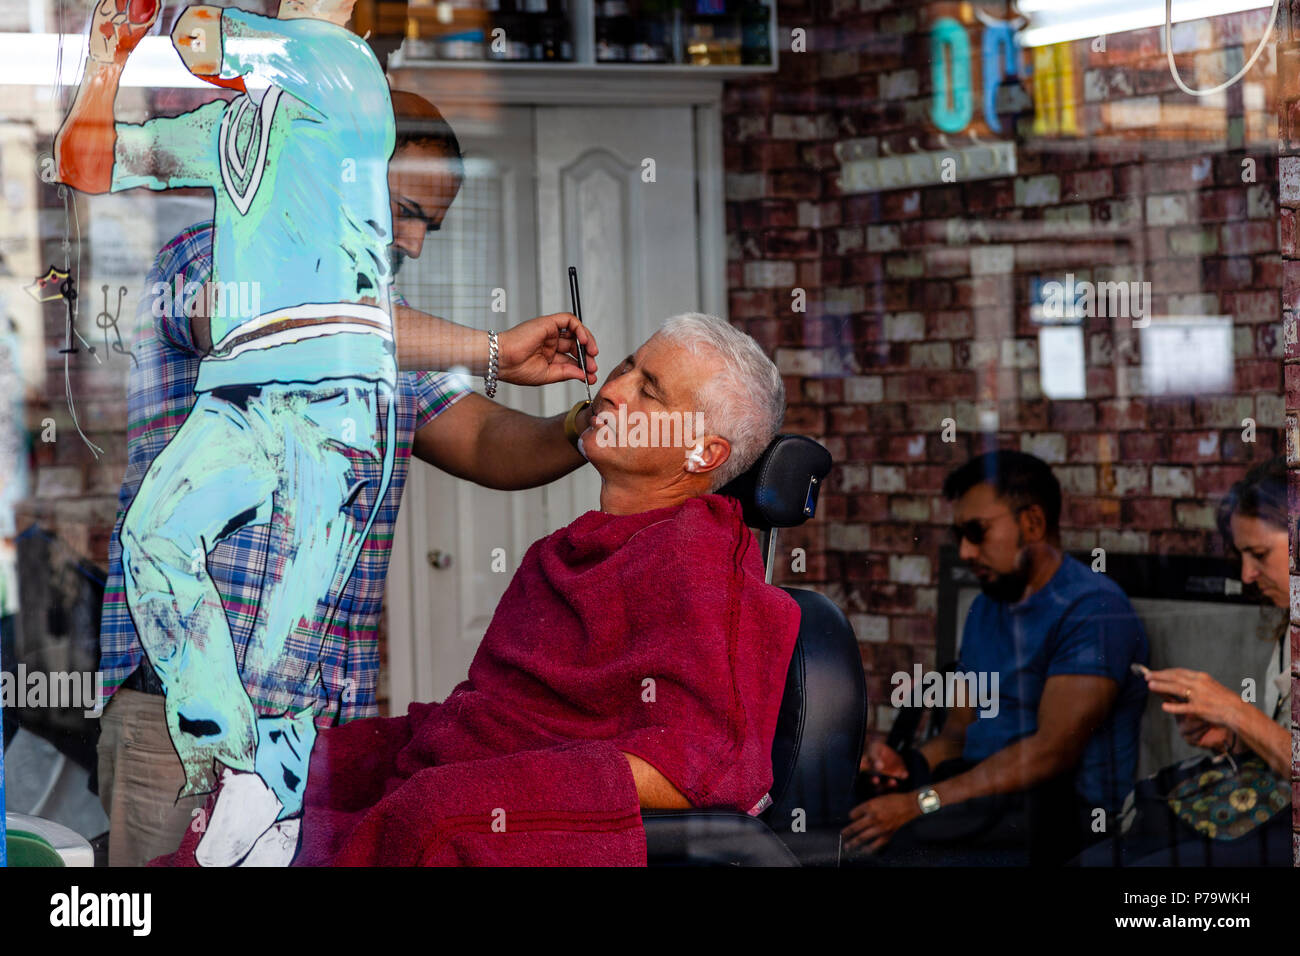 A Man Having A Wet Shave In A Hairdressing Salon, Brick Lane, London, United Kingdom Stock Photo